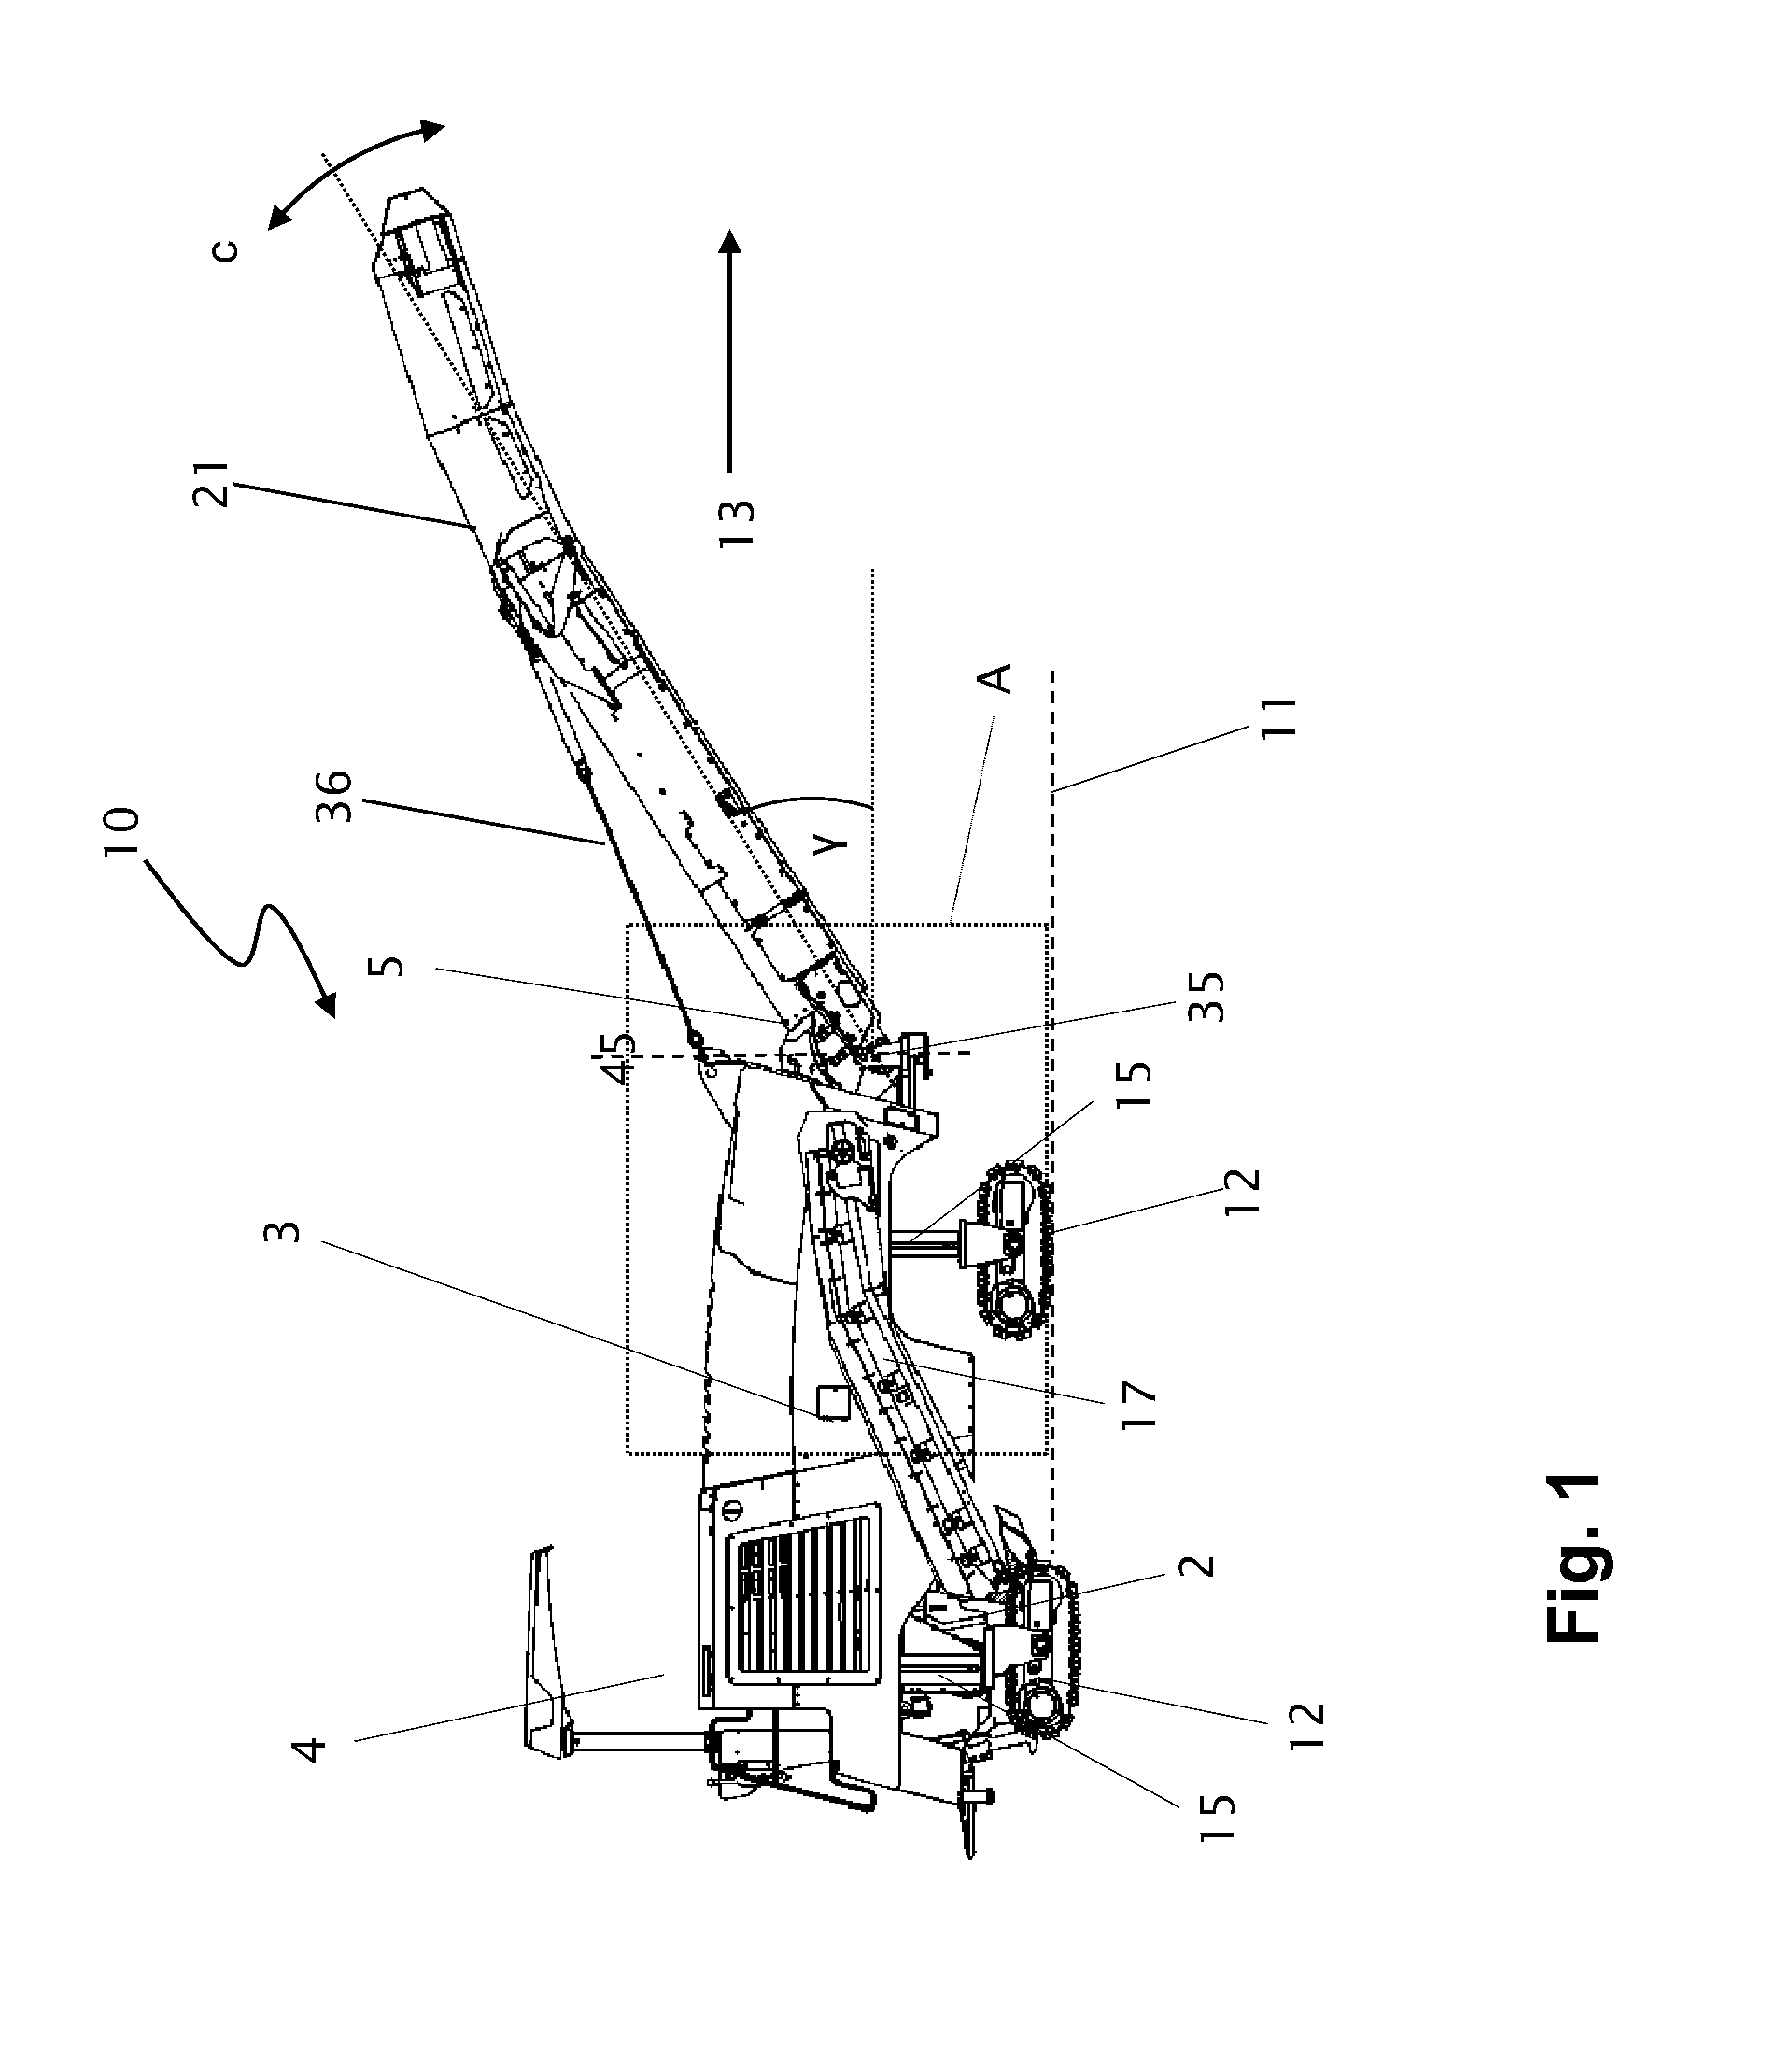 Material transfer apparatus for a ground milling machine, and a ground milling machine, especially road milling machine, having such a material transfer apparatus